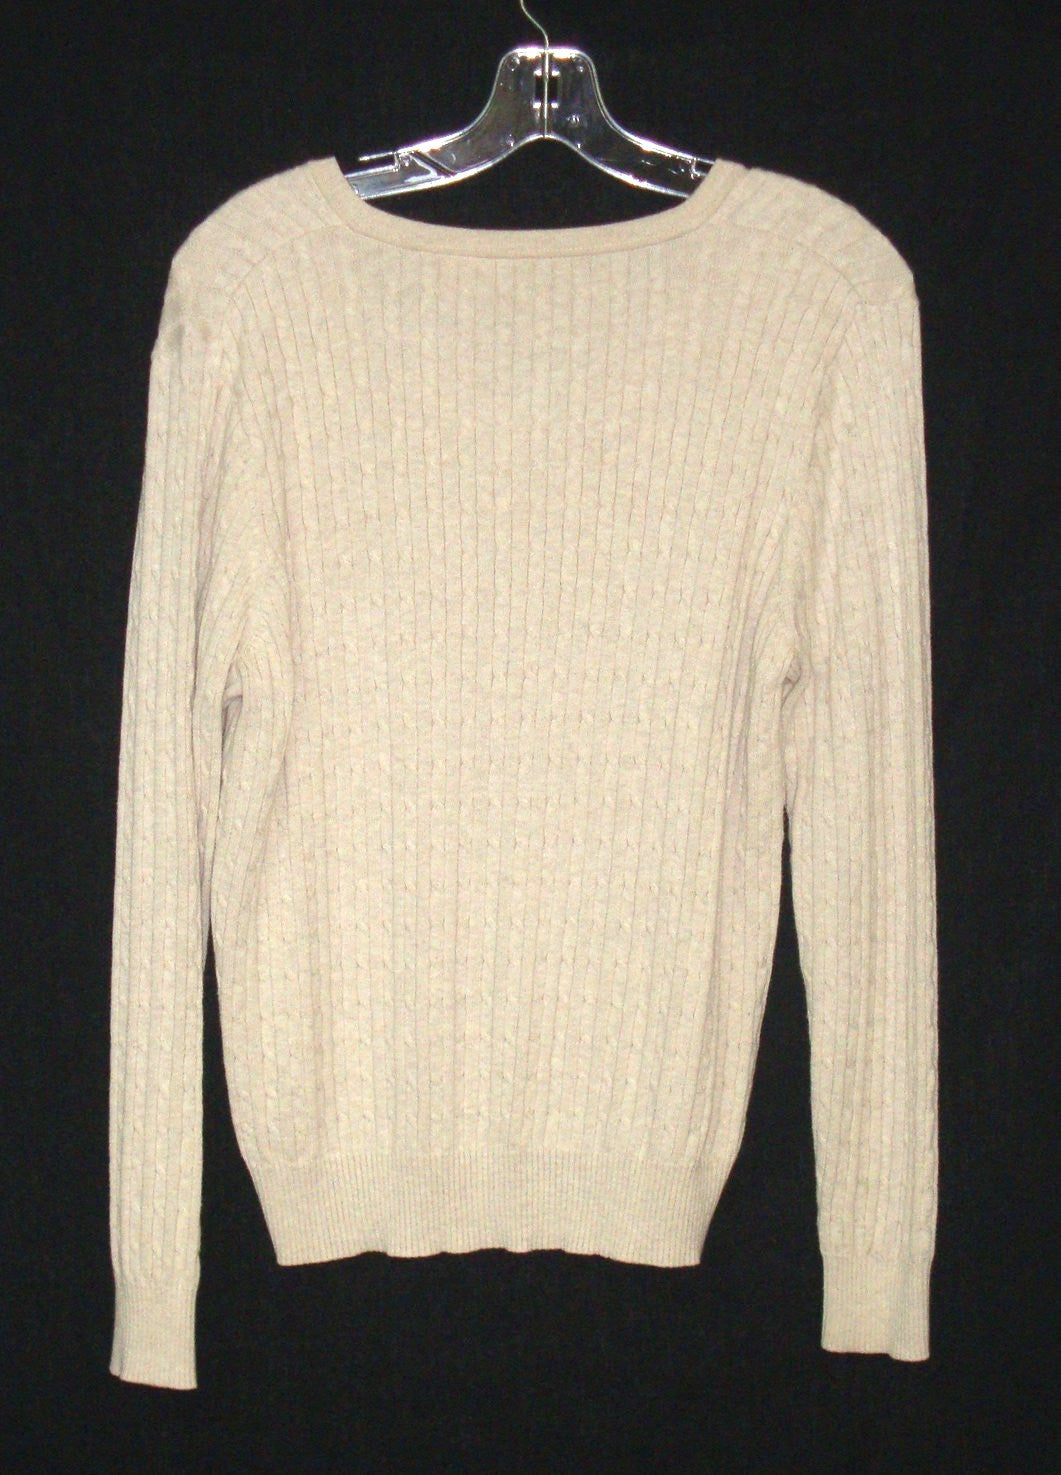 BEIGE CABLE KNIT V-NECK PULL-OVER SWEATER, LONG SLEEVE SZ LARGE